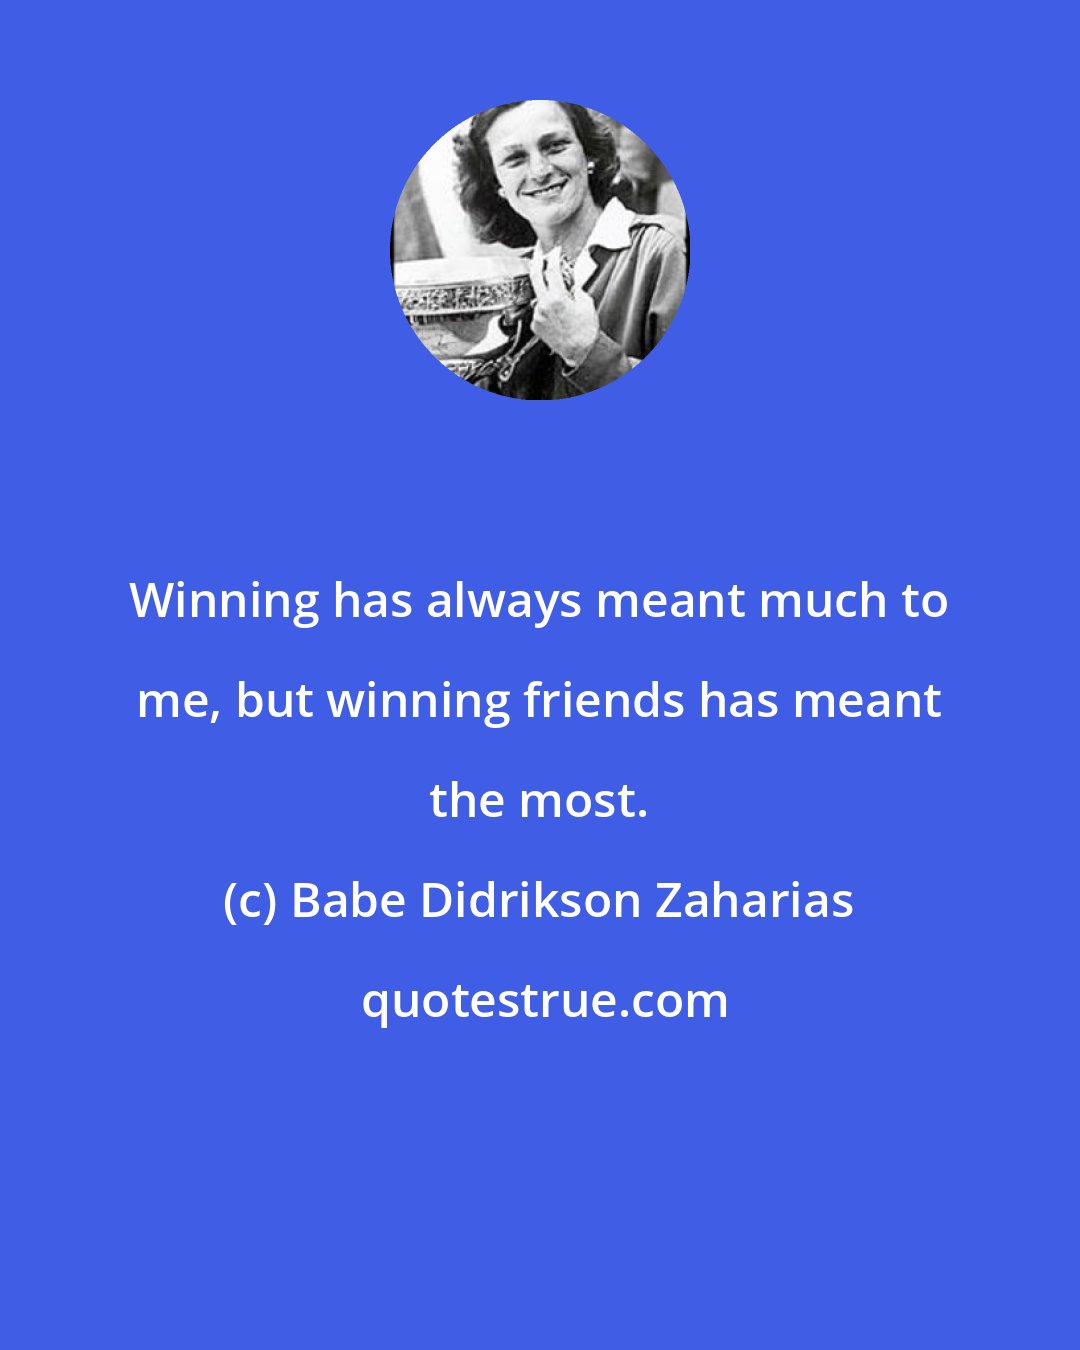 Babe Didrikson Zaharias: Winning has always meant much to me, but winning friends has meant the most.